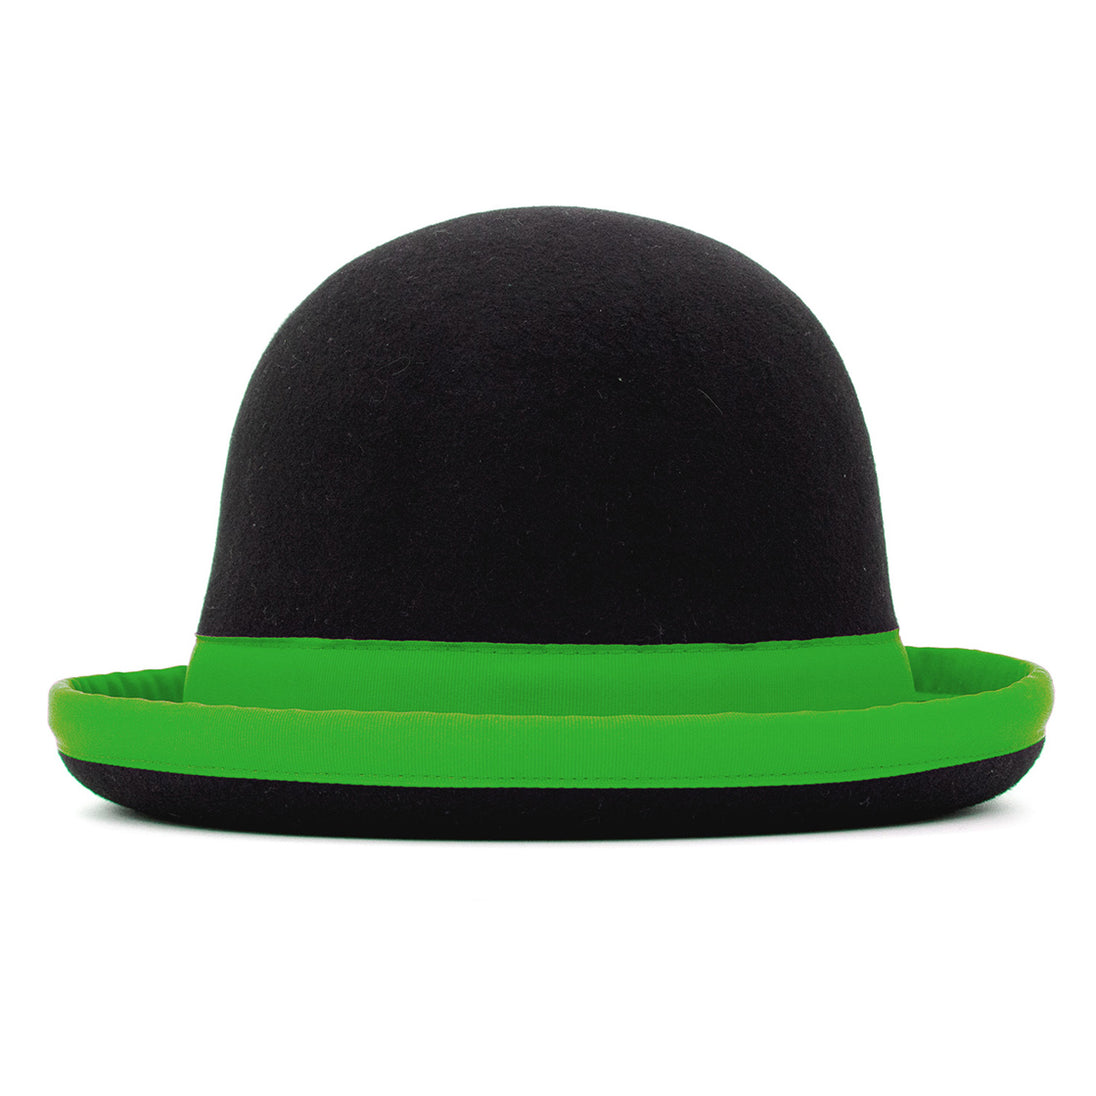 Black with green trim Hat from side